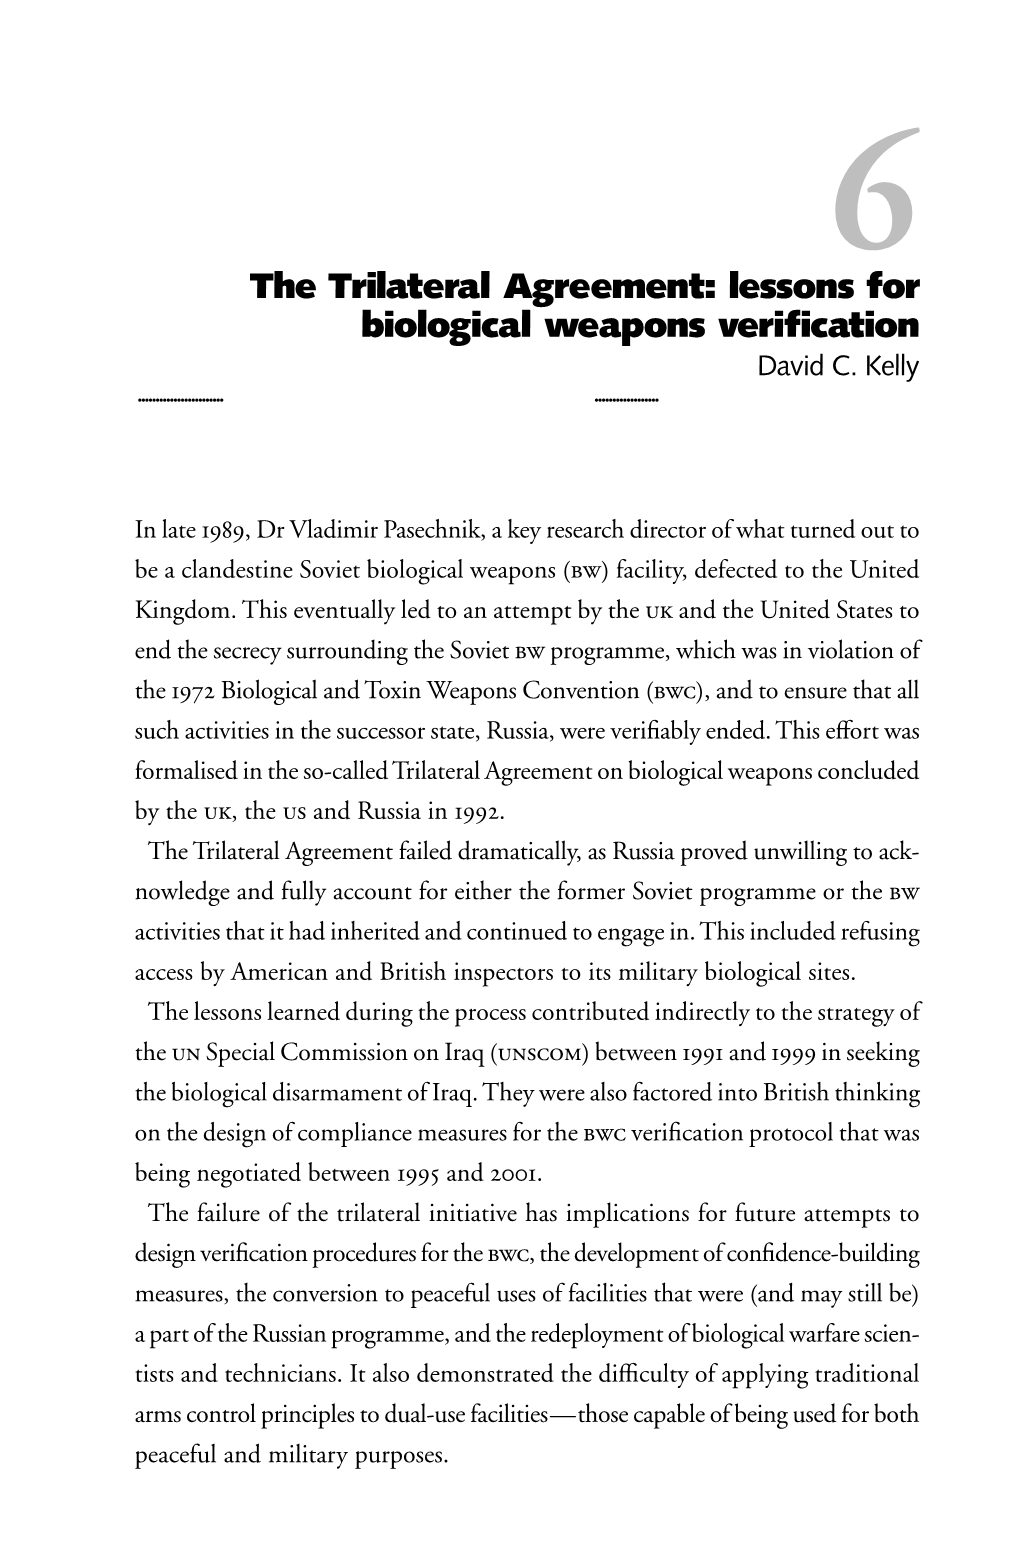 The Trilateral Agreement: Lessons for Biological Weapons Verification